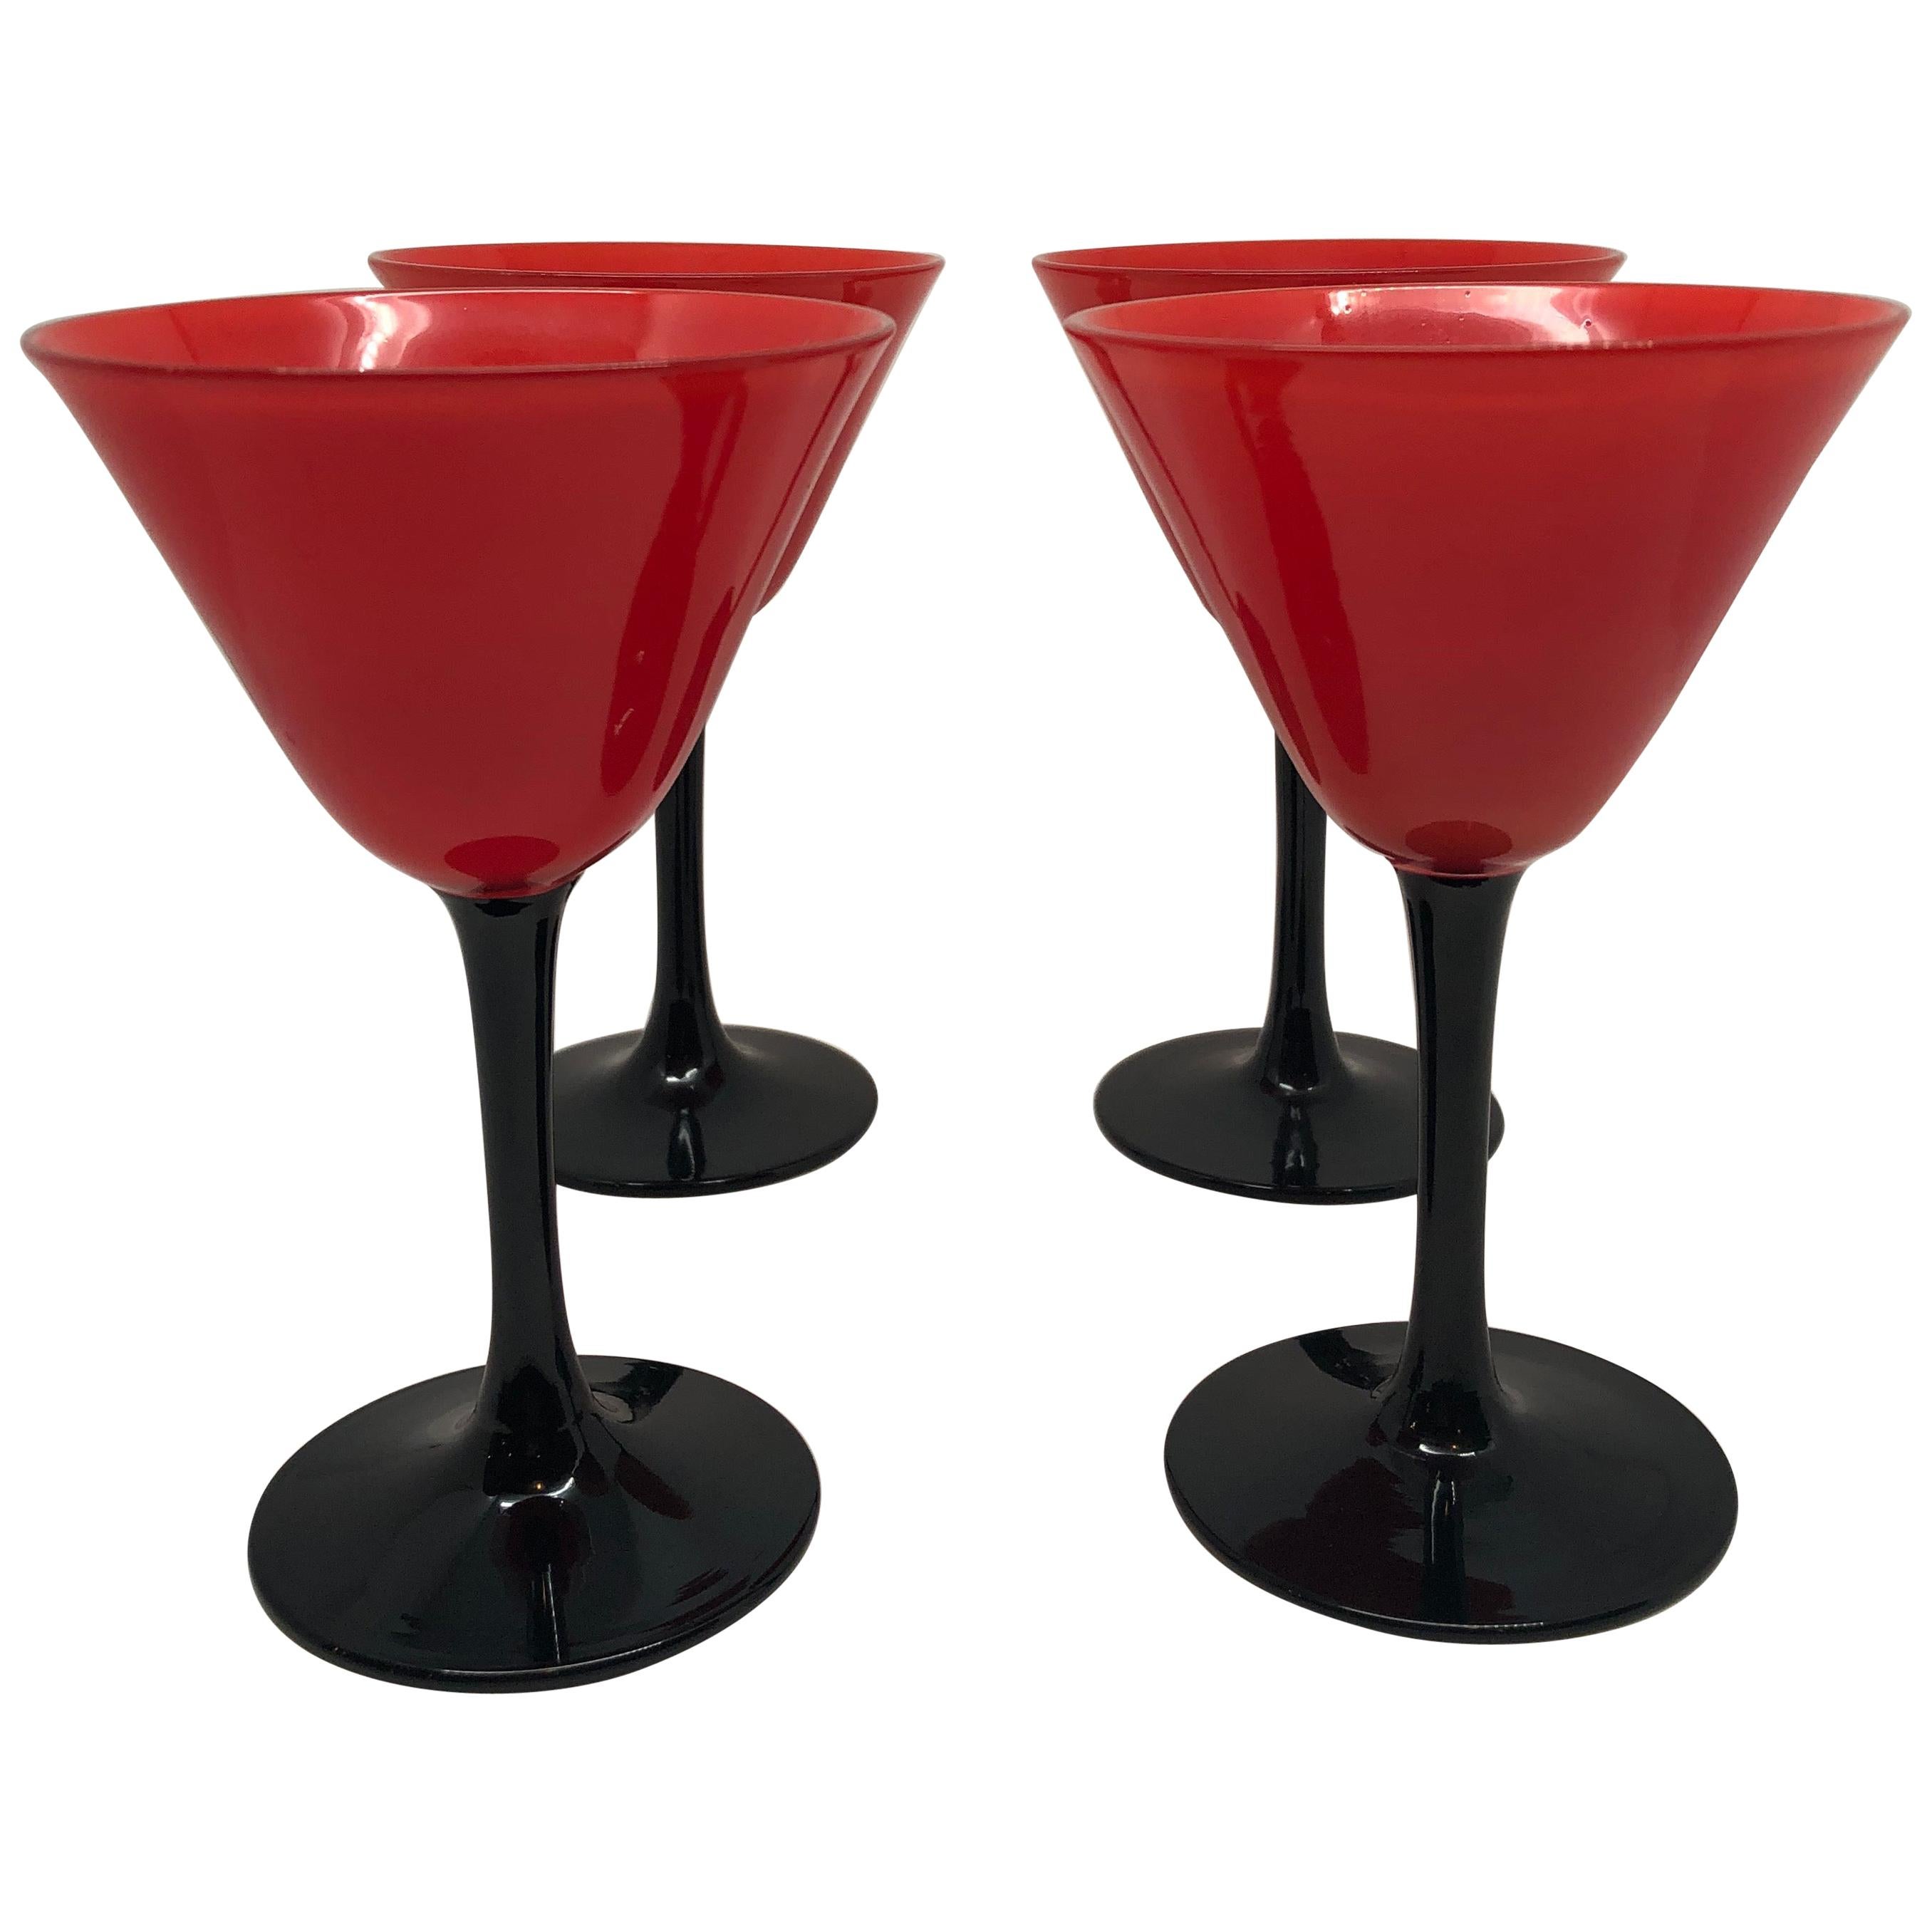 Set of 11 Pairpoint Art Deco Stemware Glasses with Red Tops and Black Stems